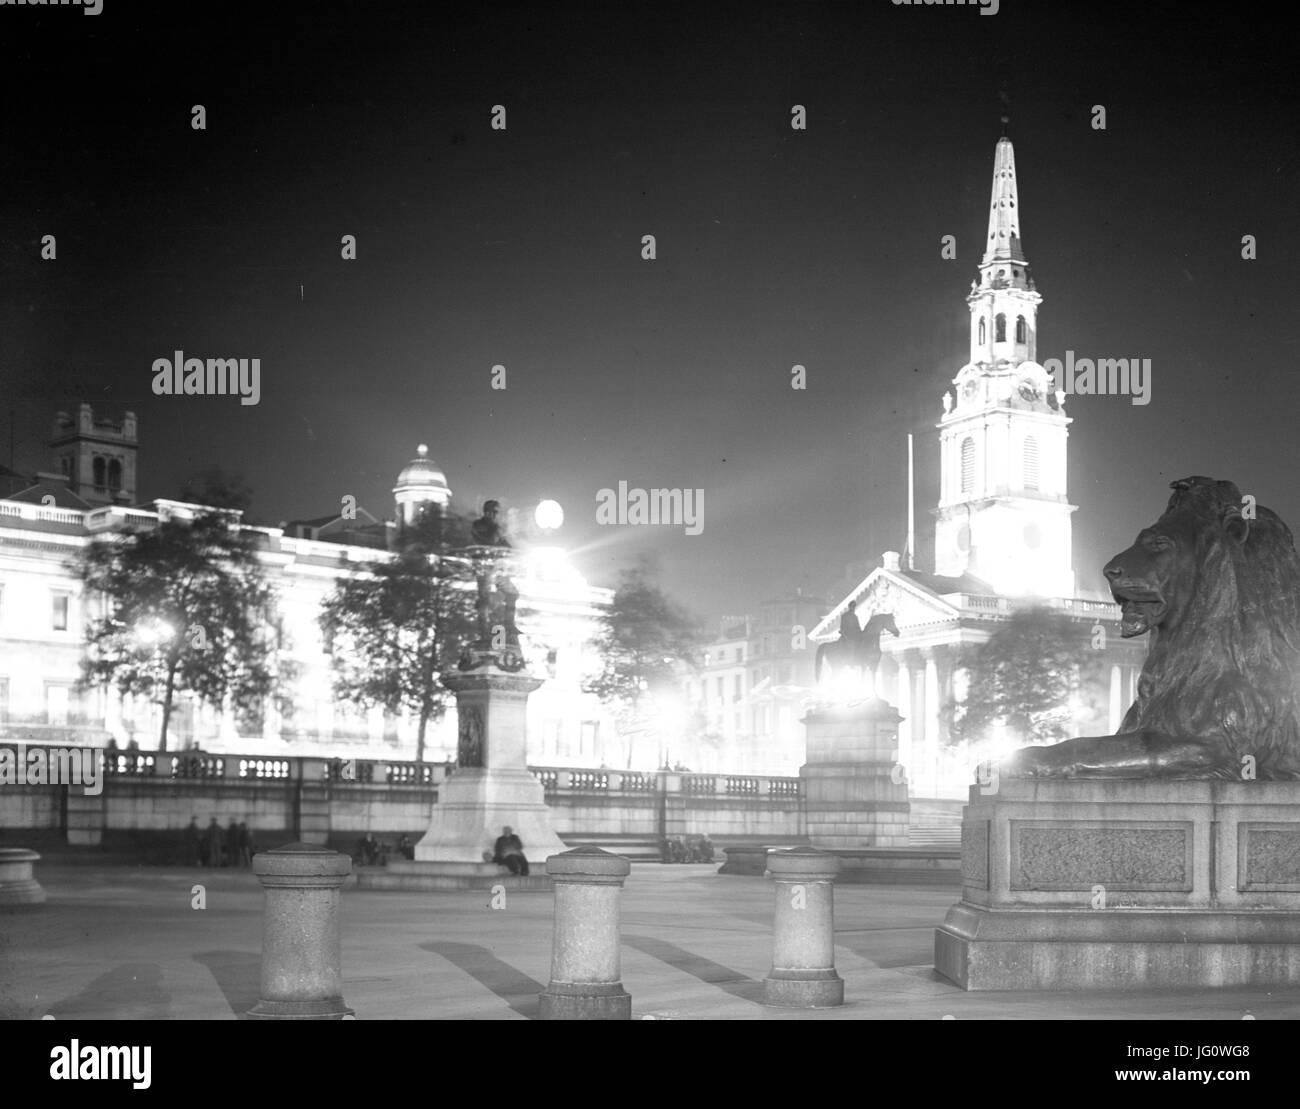 Looking across Trafalgar Square towards the National Gallery (at back on right), St Martin-in-the-Fields Church and the Coliseum (back). one of the lions on Nelson's Column is seen on right. Stock Photo